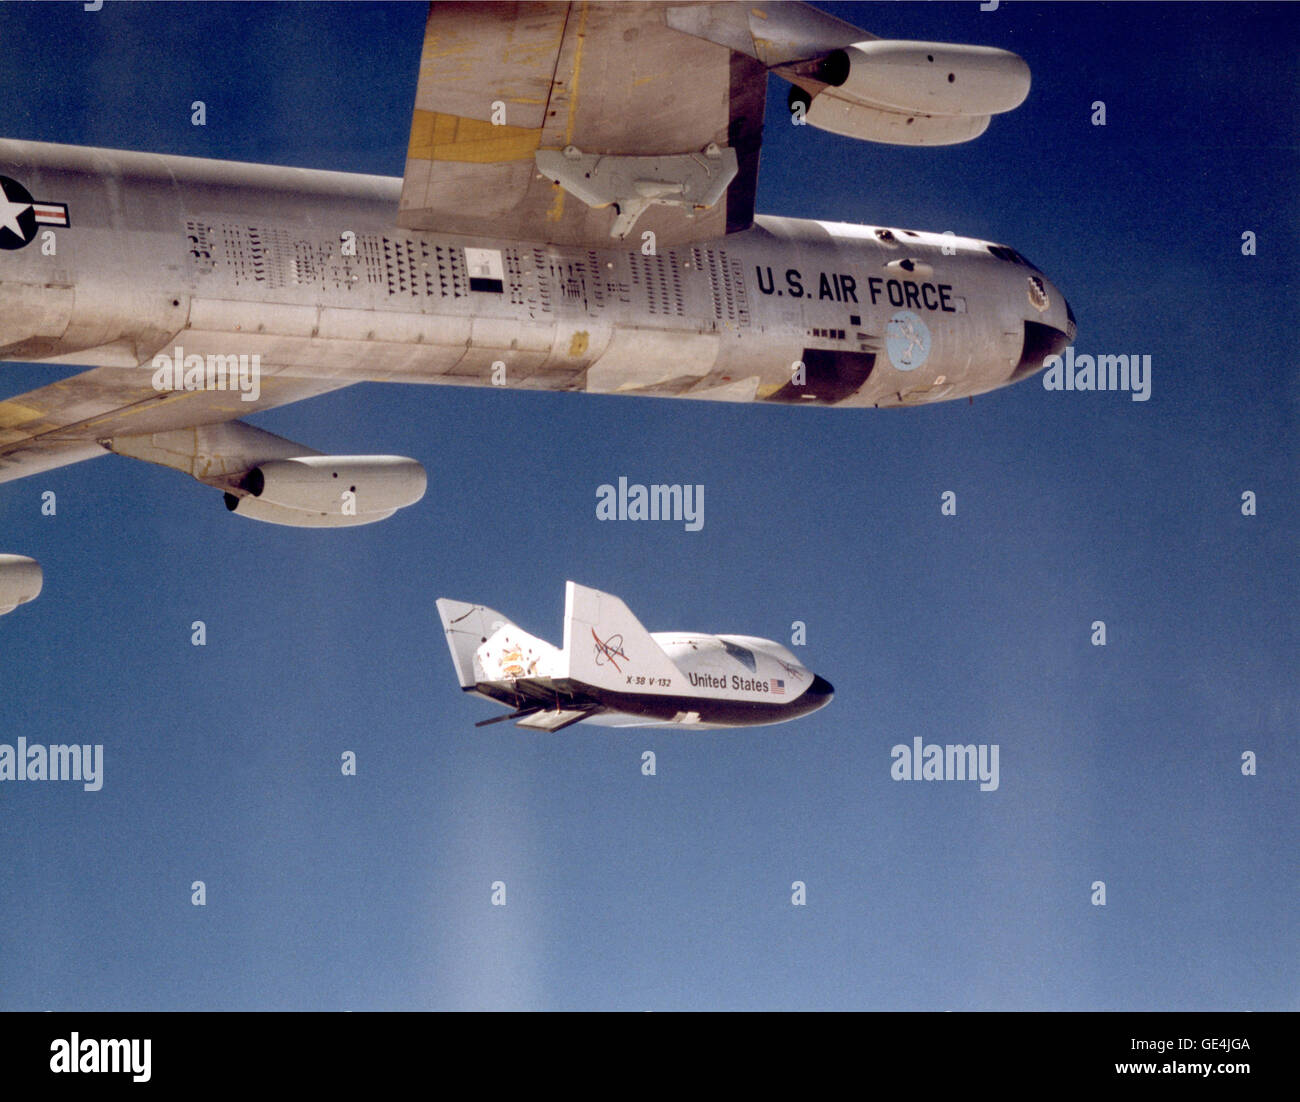 (July 1, 1999) The X-38 research vehicle drops away from NASA's B-52 mothership immediately after being released from the B-52's wing pylon. More than 30 years earlier, this same B-52 launched the original lifting-body vehicles flight tested by NASA and the Air Force at what is now called the Dryden Flight Research Center and the Air Force Flight Test Center. NASA B-52 Tail Number 008 is an air launch carrier aircraft &quot;mothership,&quot; as well as a research aircraft platform that has been used on a variety of research projects.   Image # : EC99-45080-25 Stock Photo